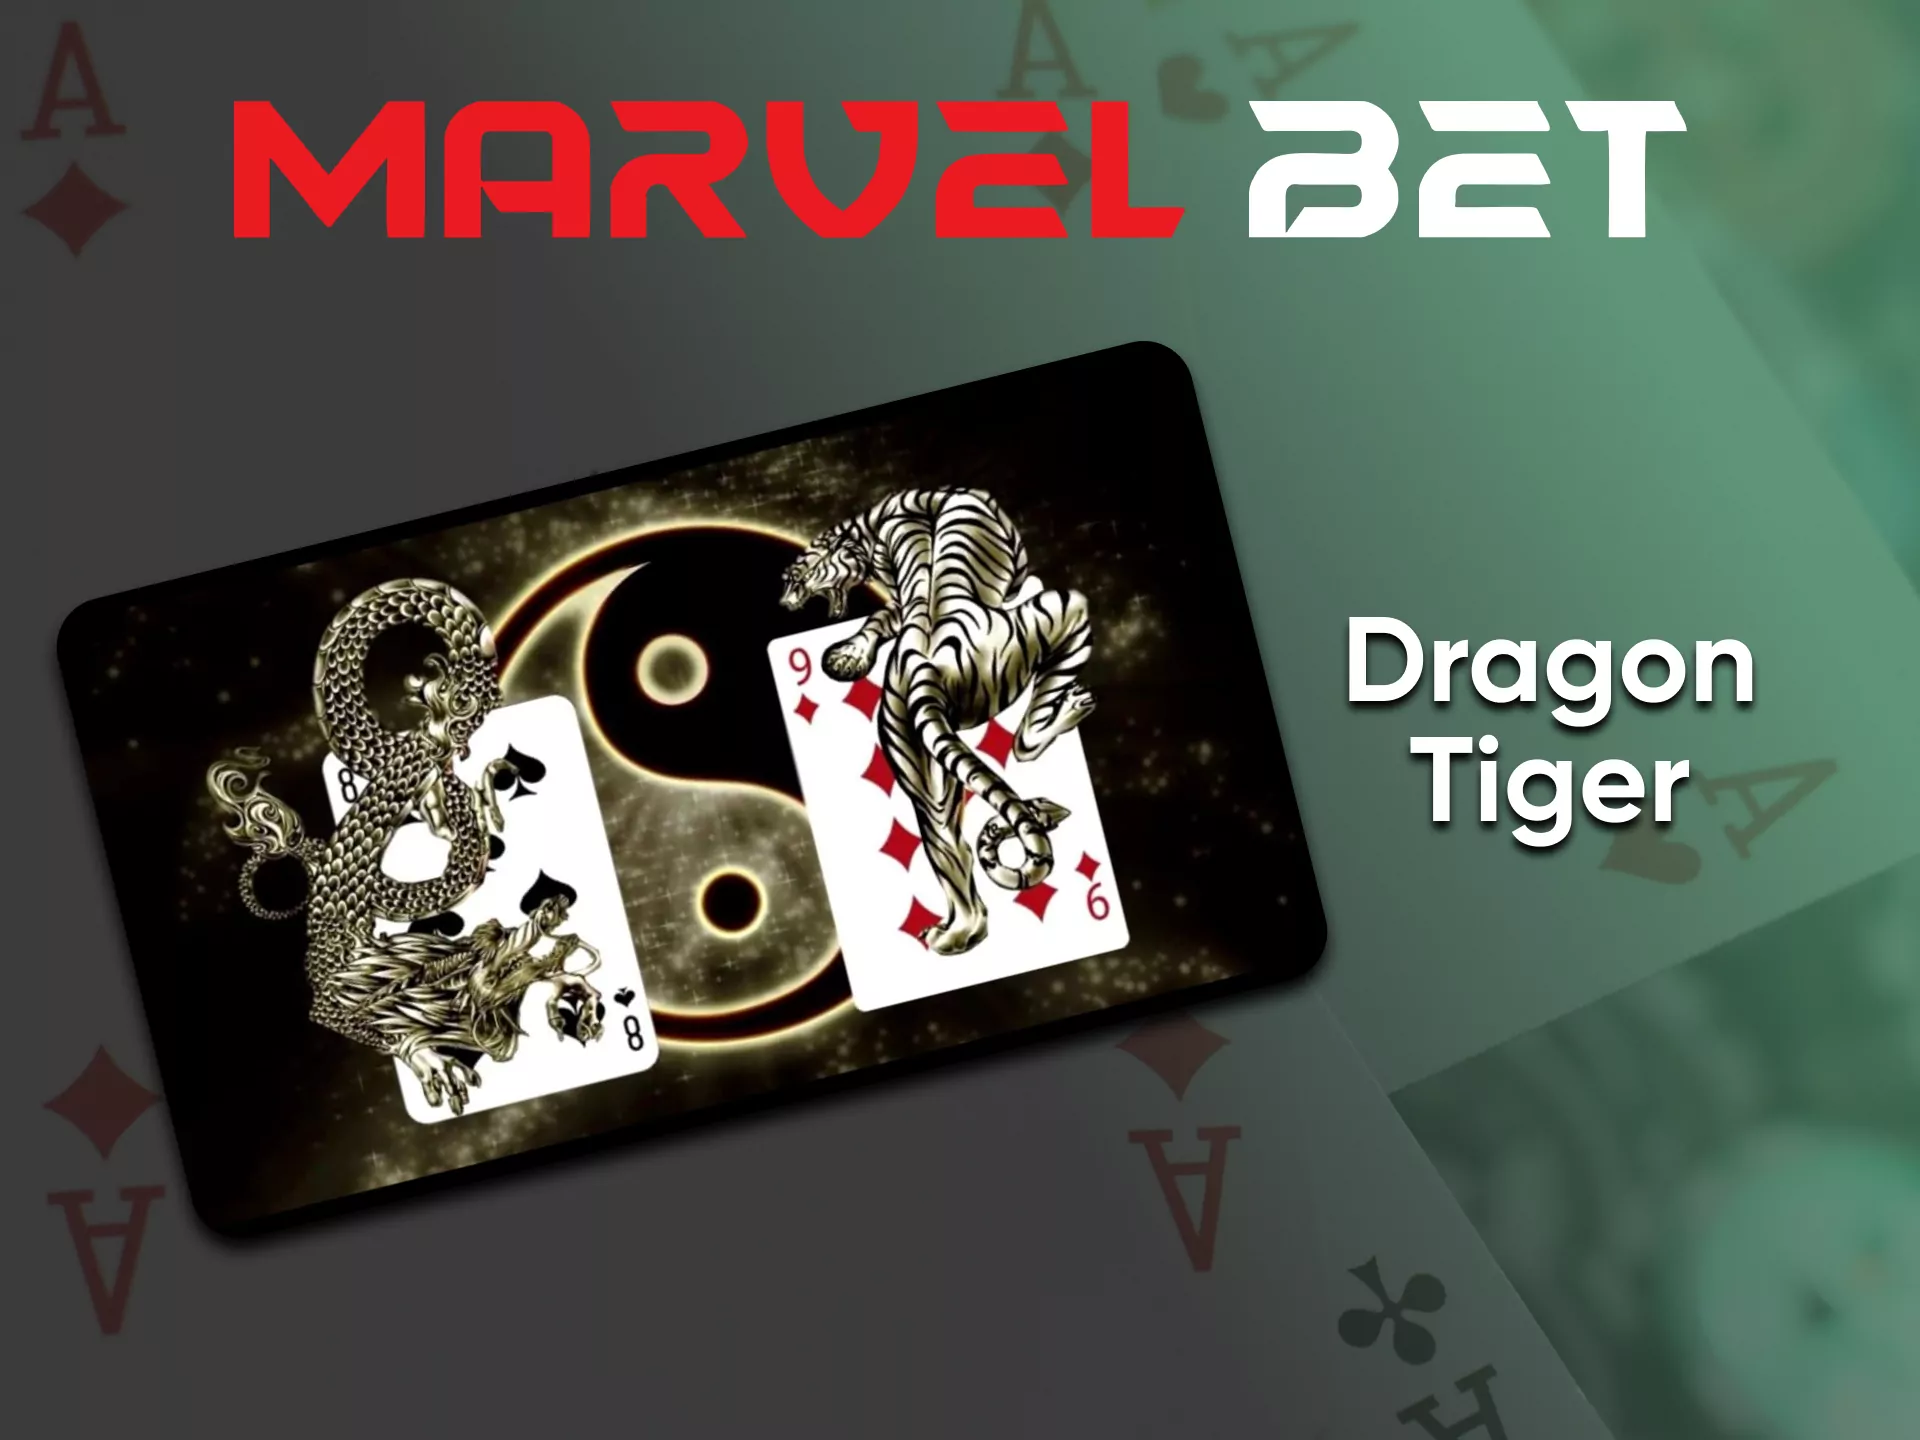 To play Dragon Tiger, find a game in the Marvelbet Online Casino.